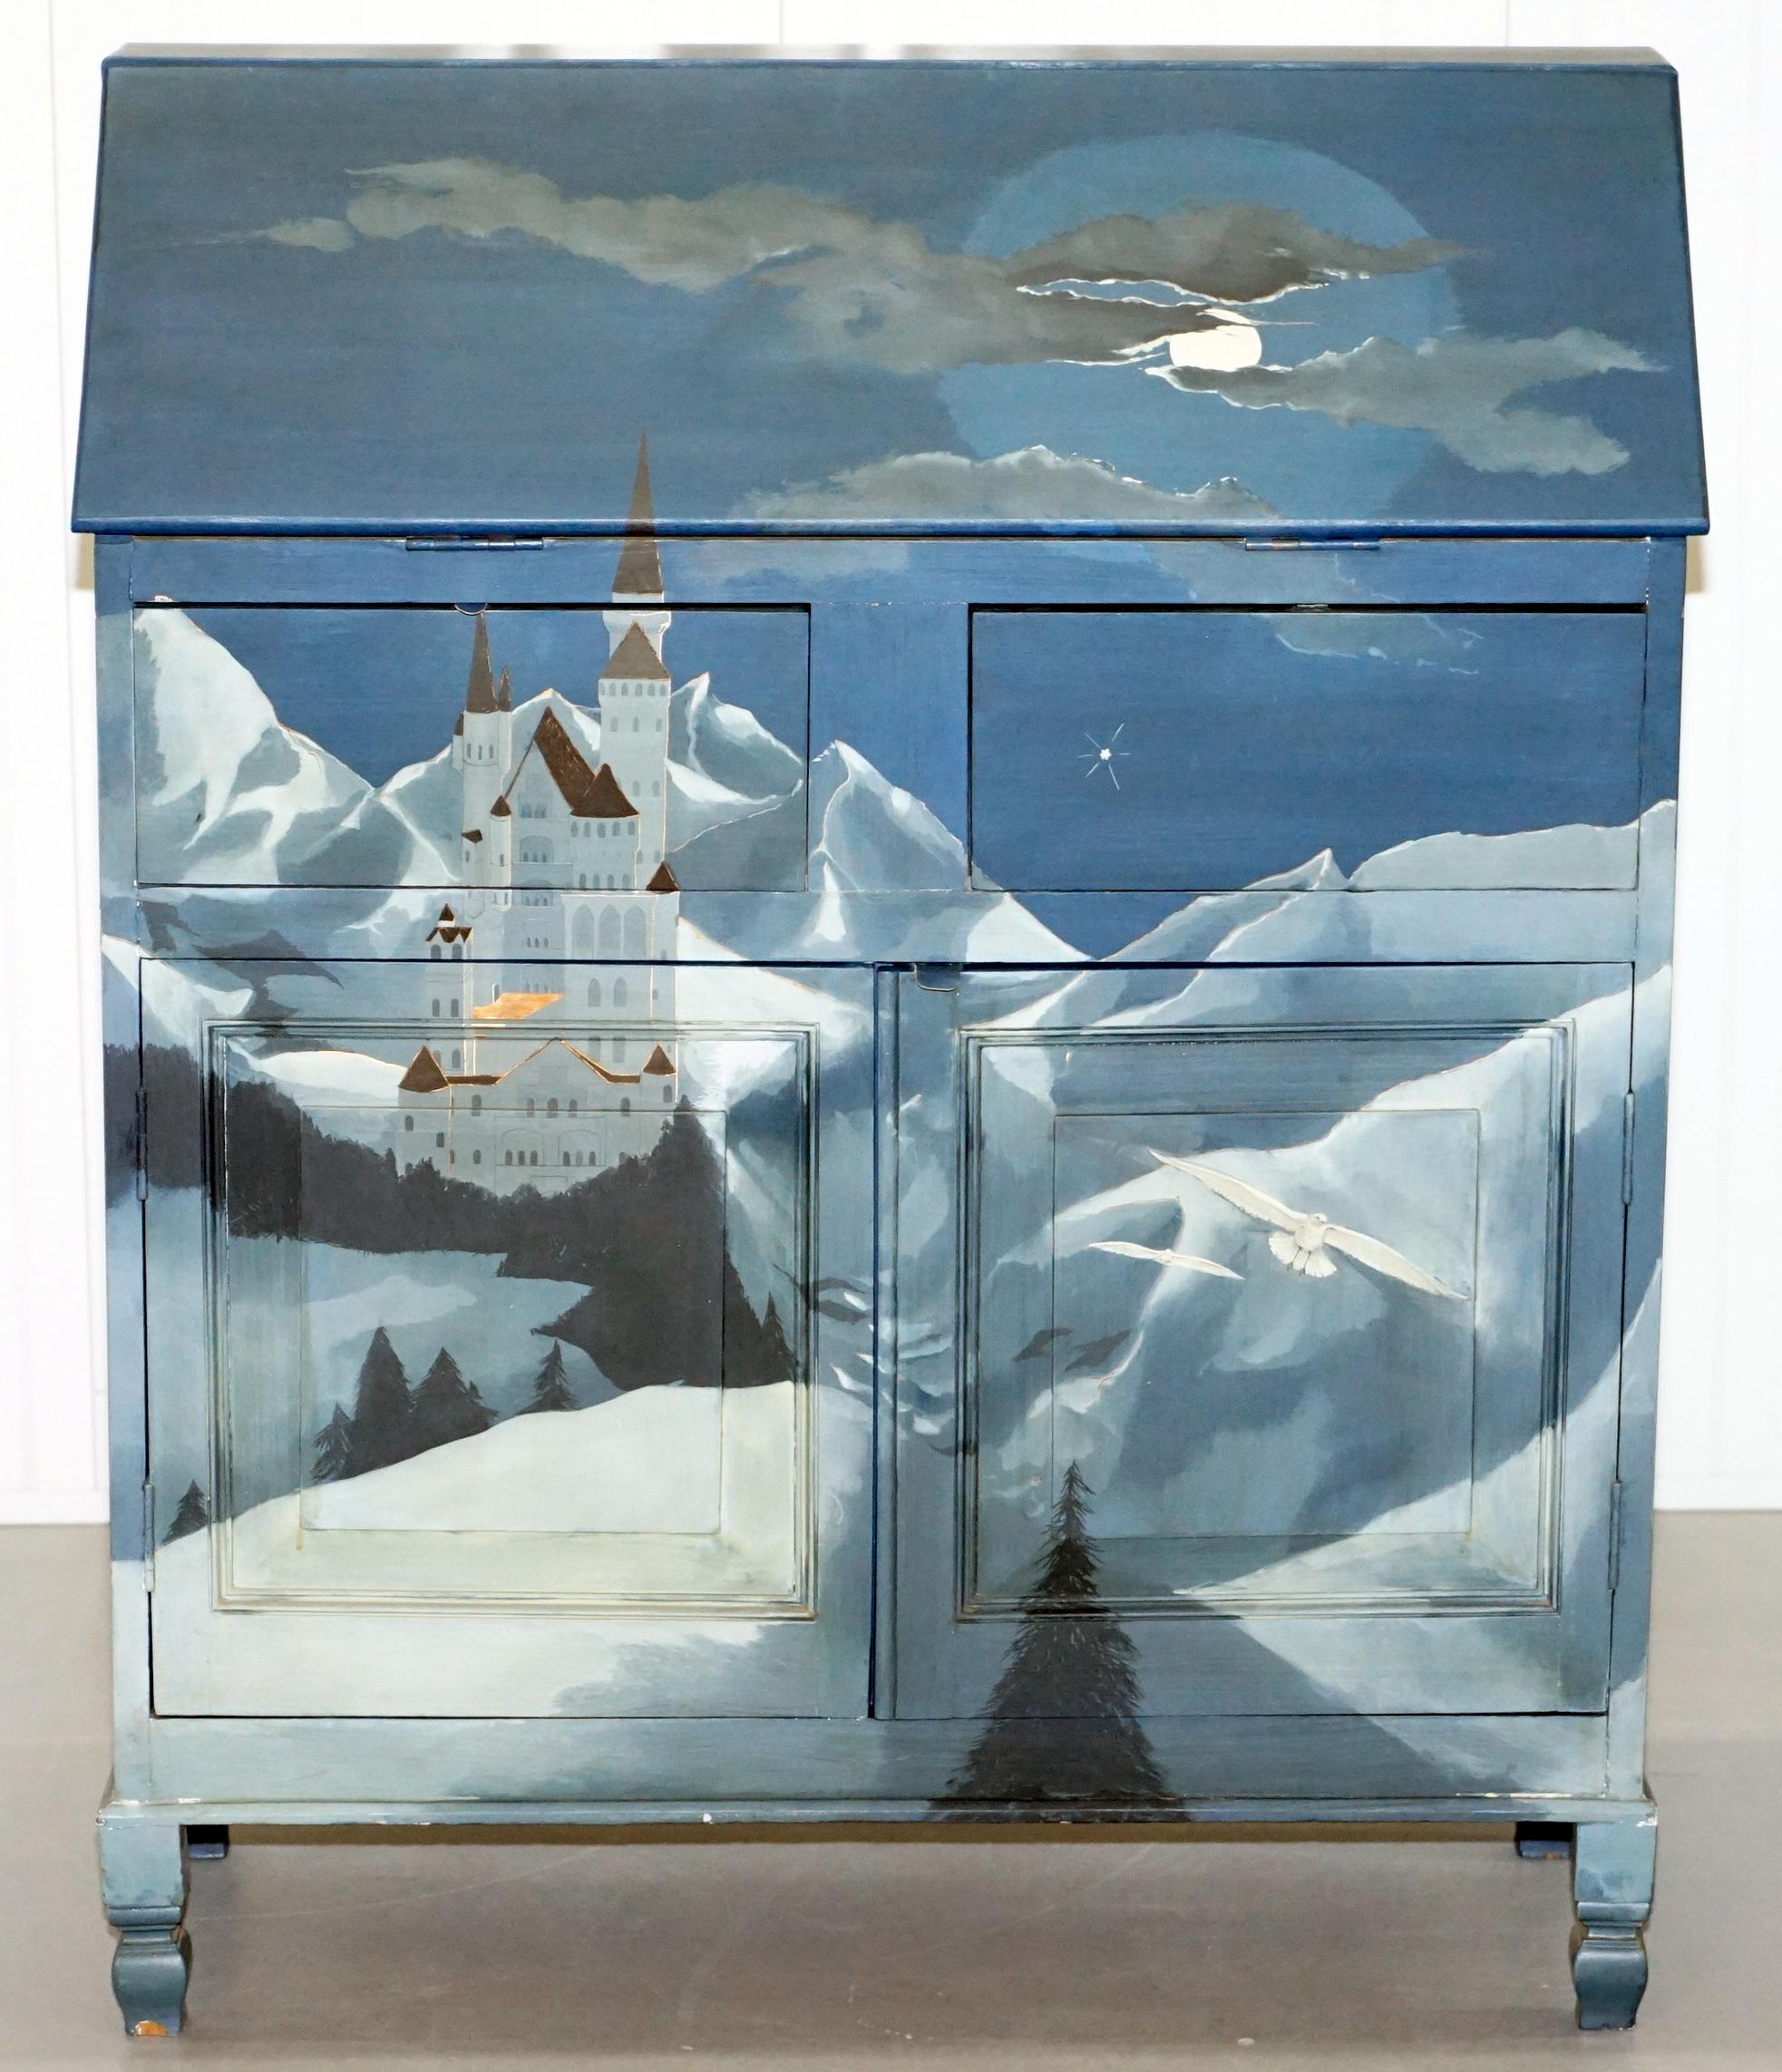 We are delighted to offer for auction this lovely hand painted writing Bureau depicting Neuschwanstein castle in Bavaria Germany in the mountains

There are around 50-100 high definition super-sized pictures at the bottom of this page

A very